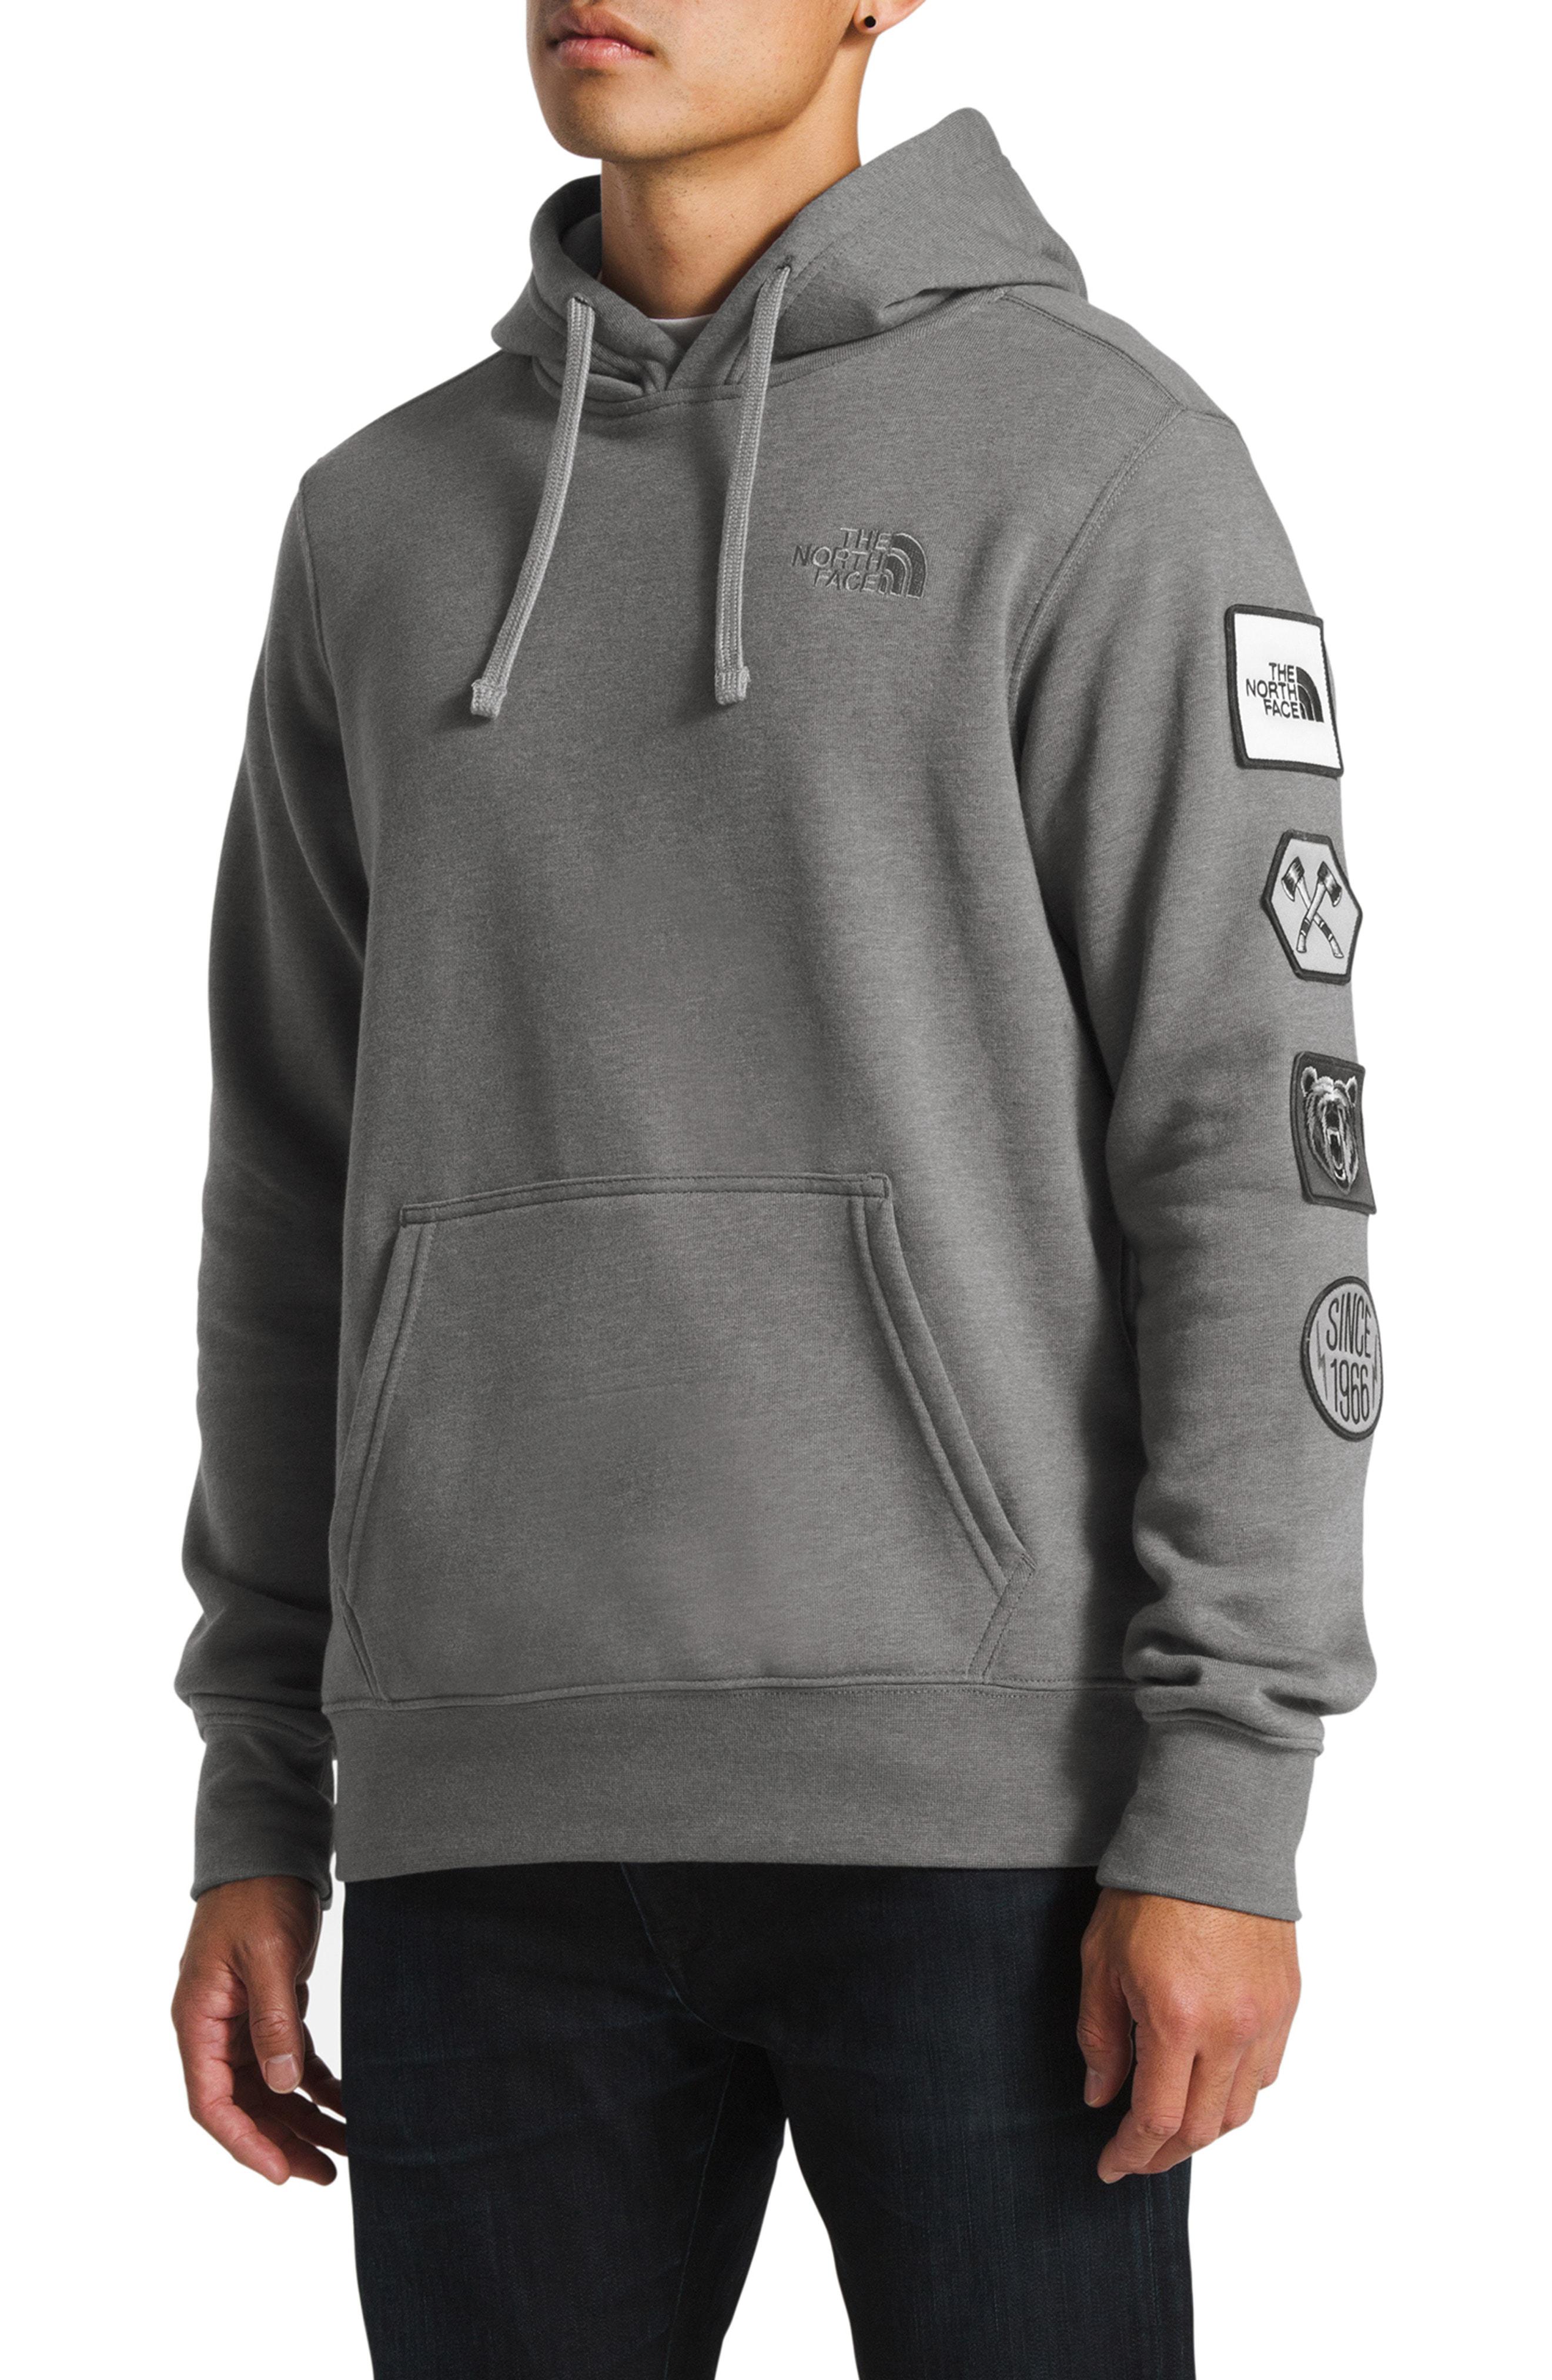 North Face Urban Patches Hoodie in Grey 